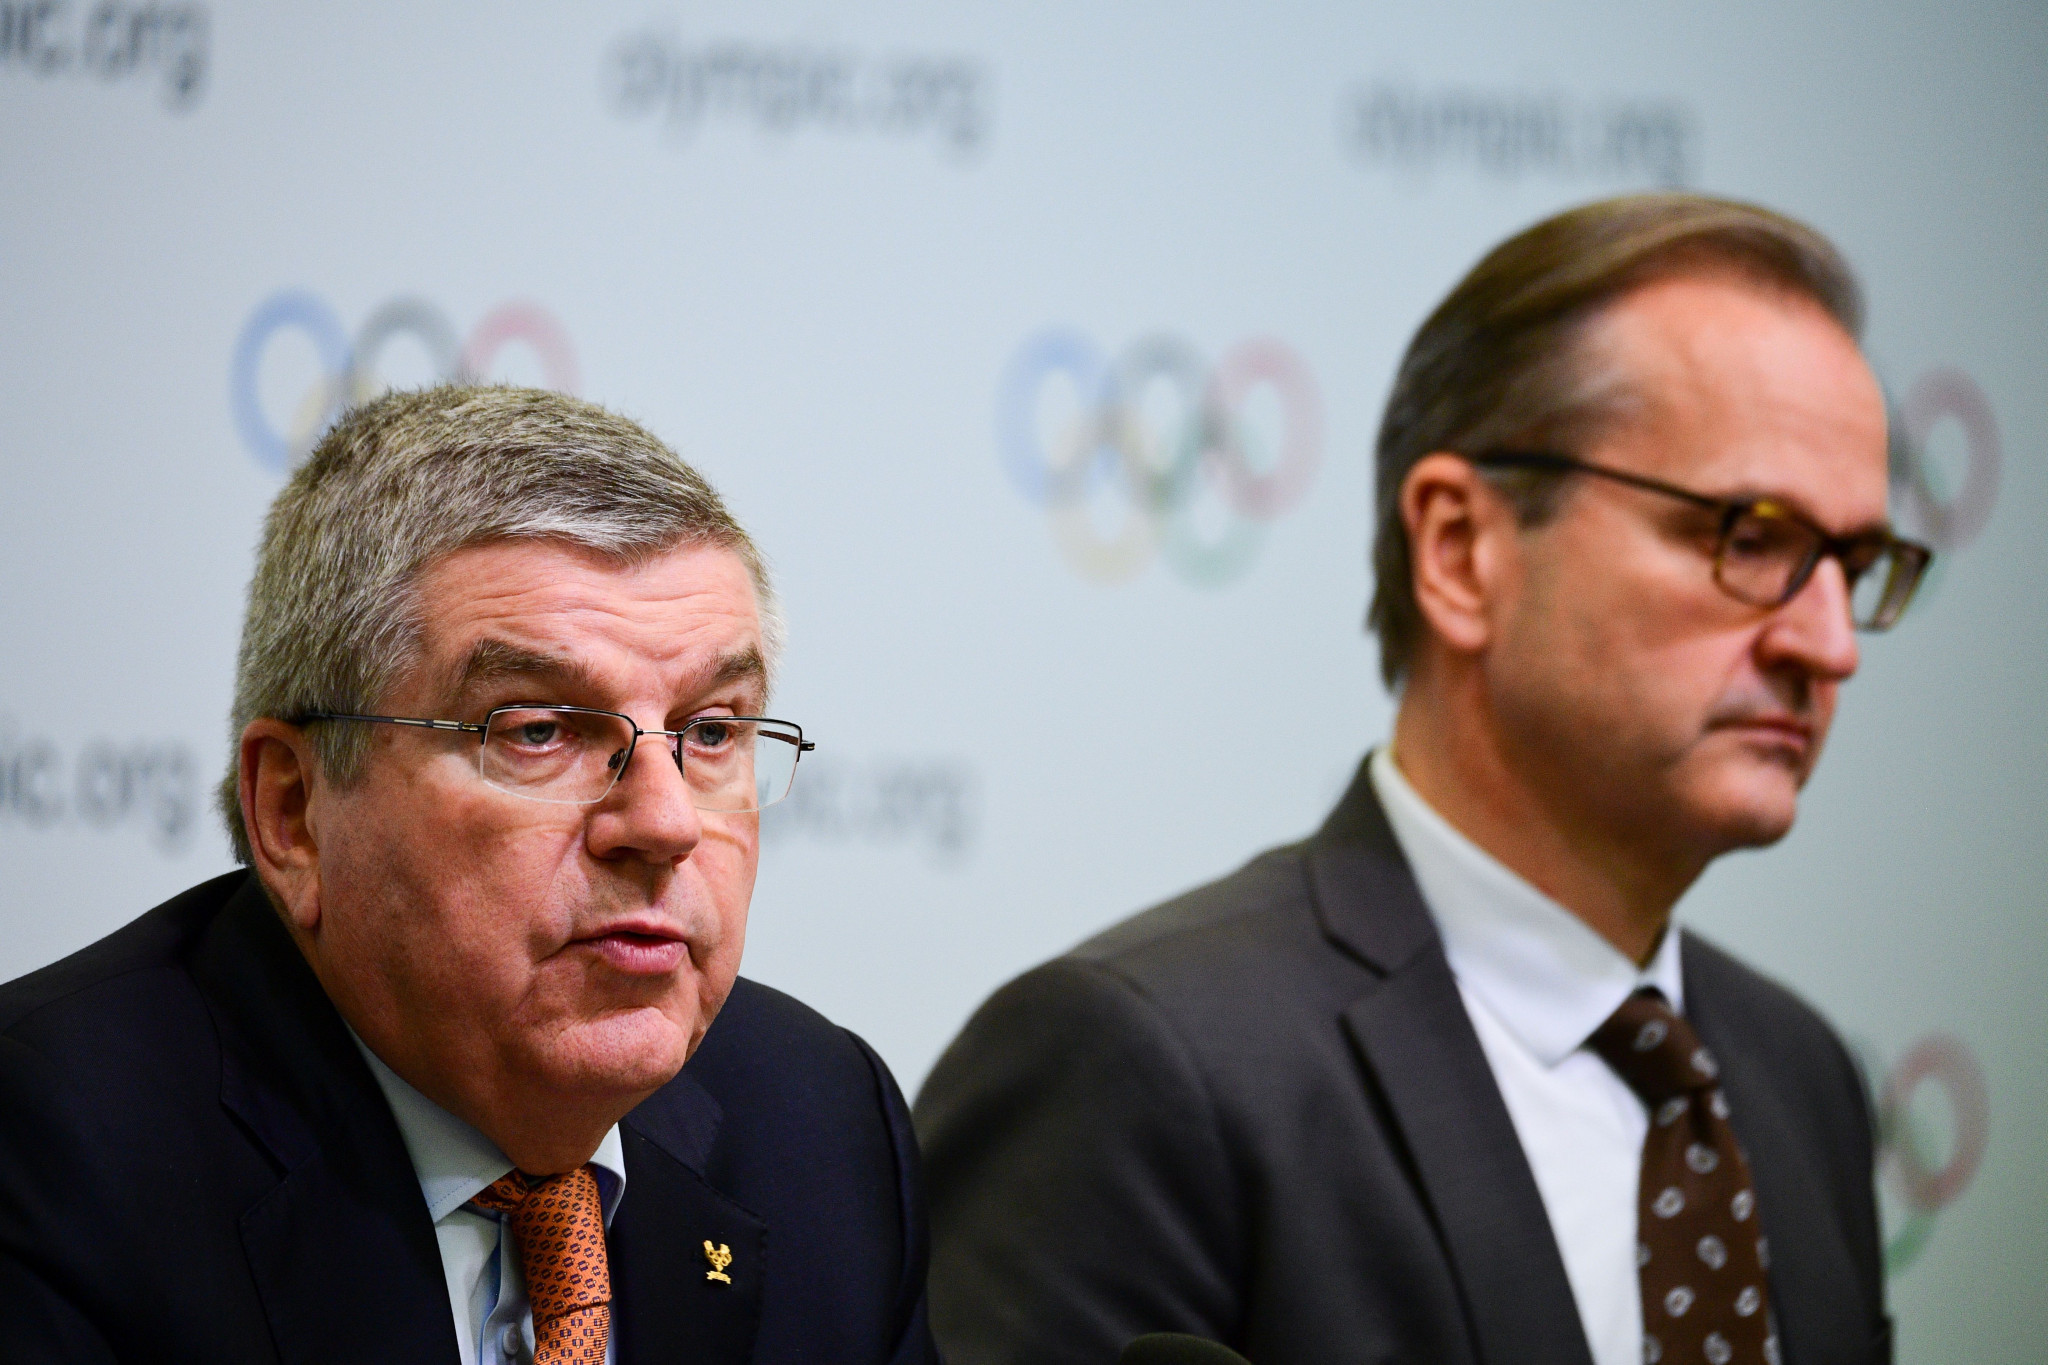 IOC President Thomas Bach effectively guaranteed athletes there will be an Olympic boxing tournament at Tokyo 2020 ©Getty Images